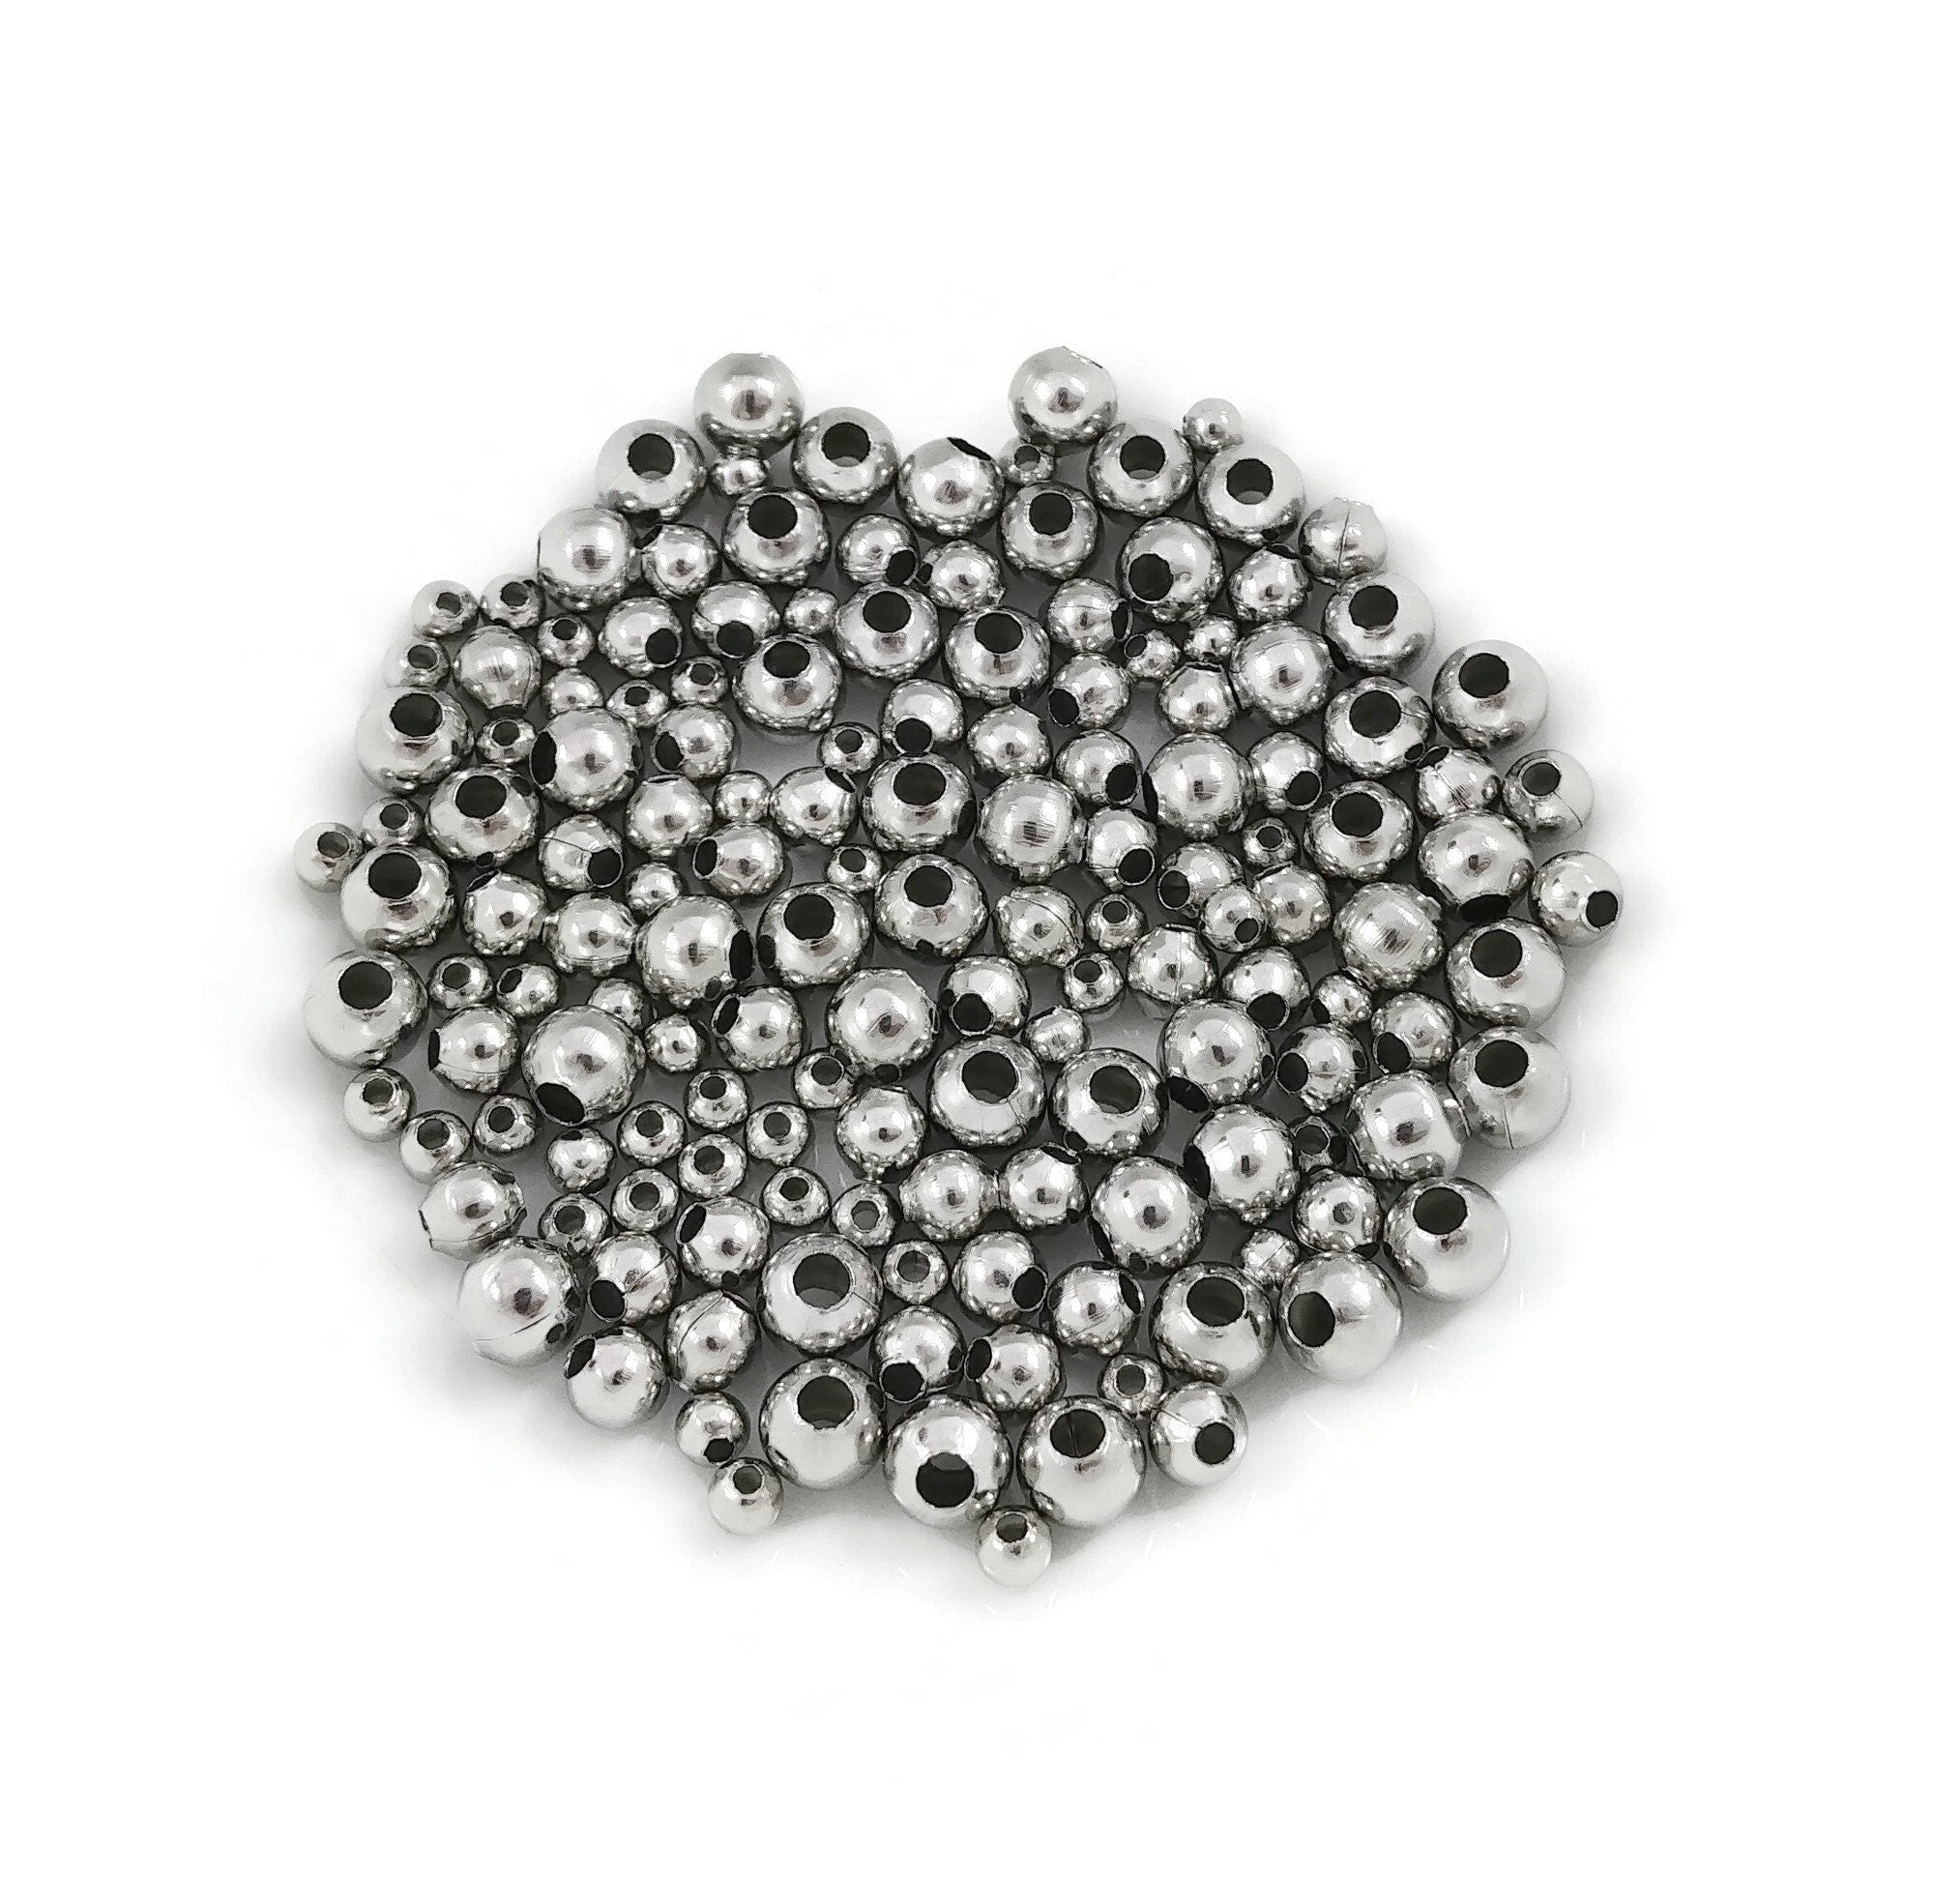 6mm Stainless Steel Round Seamless Beads-50Pc-Jewelry making